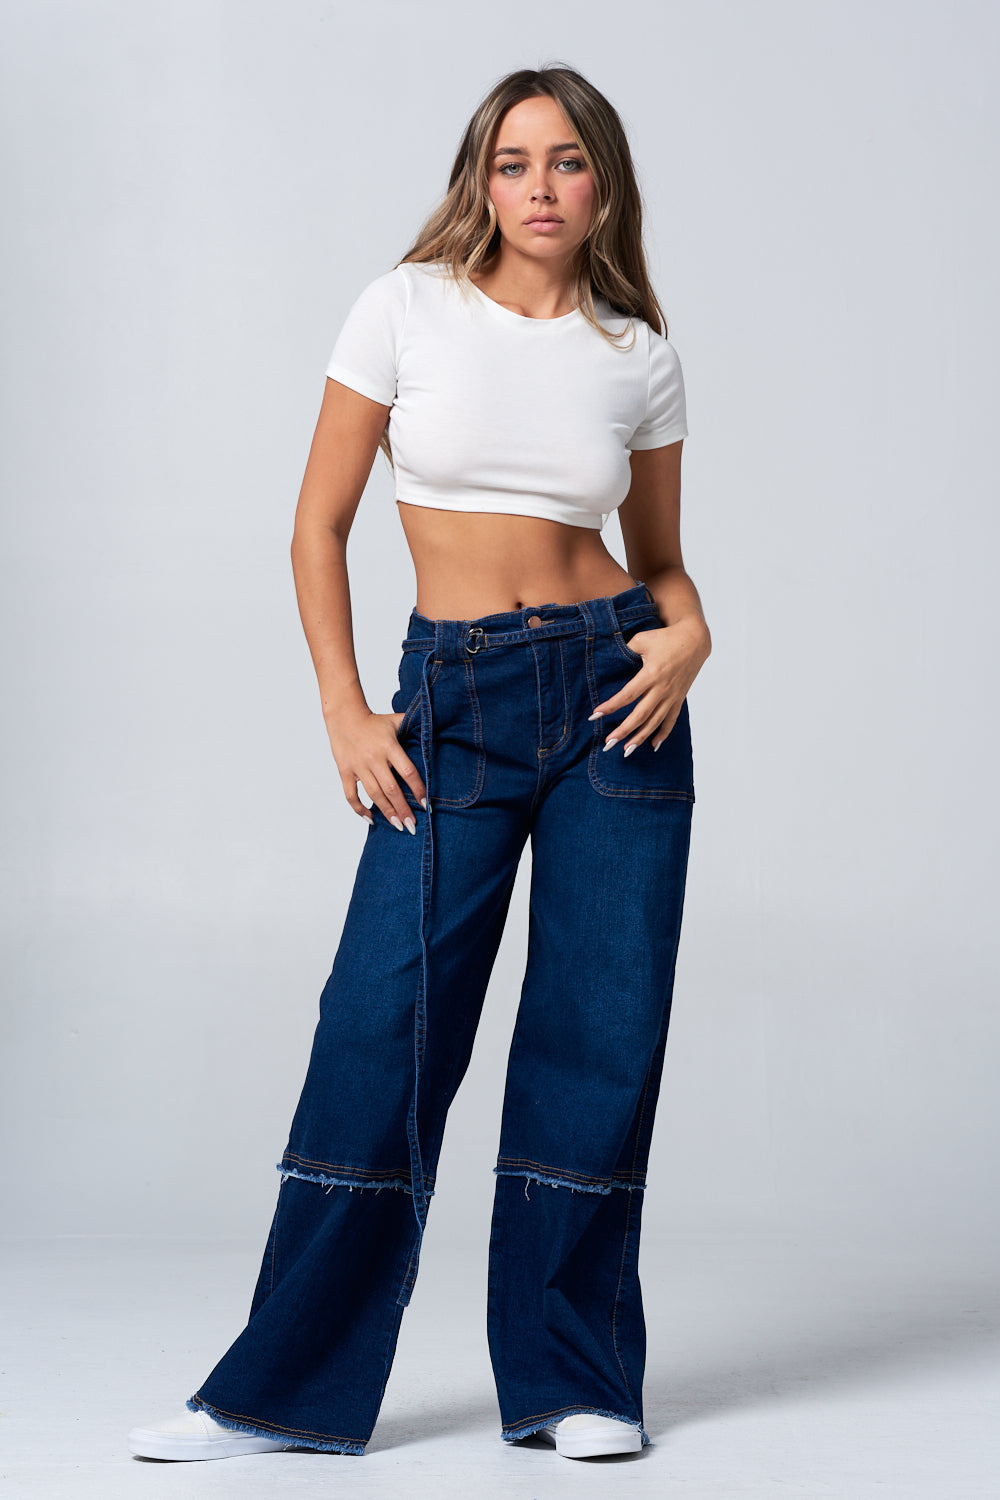 Fringed Stretch Wide Leg Utility Jeans with Detachable D Ring Belt DH2230